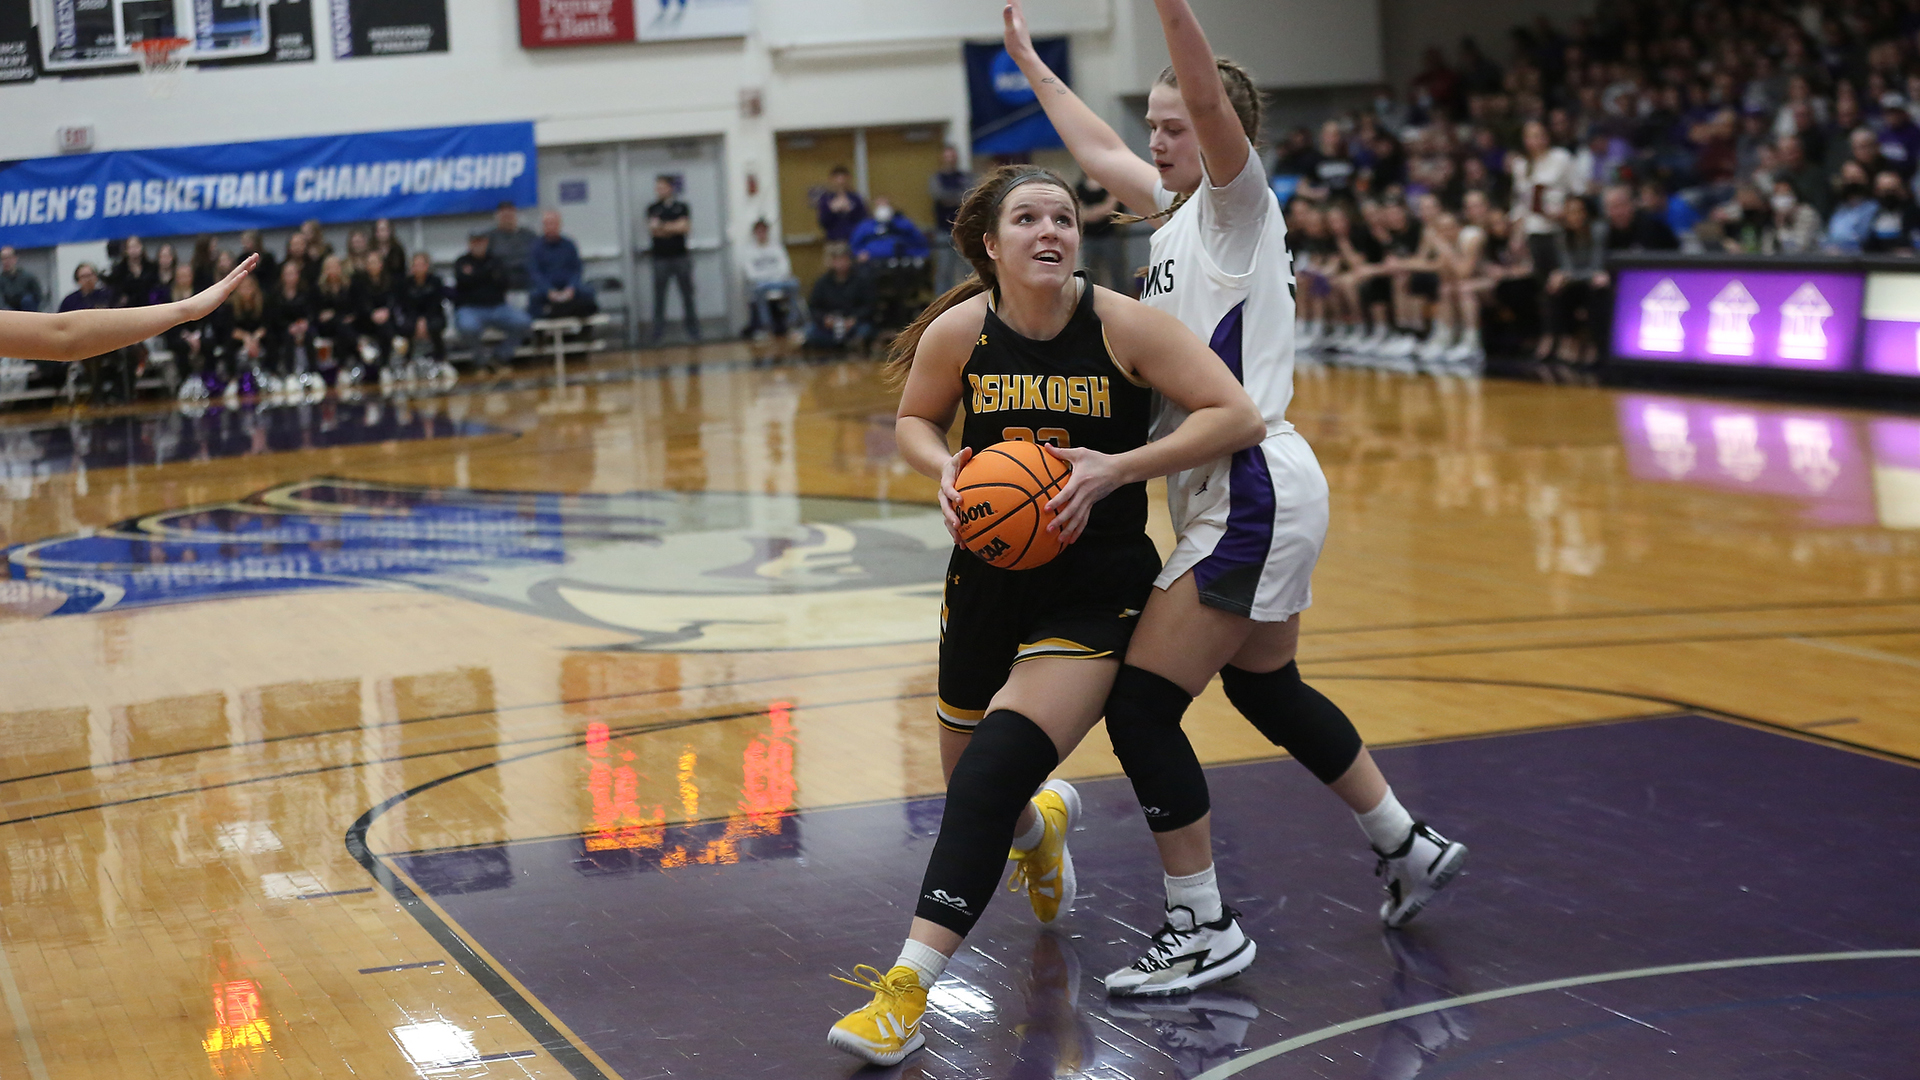 Nikki Arneson tallied 21 points against the Warhawks to conclude her career as UW-Oshkosh's 18th all-time leading scorer (1,082).